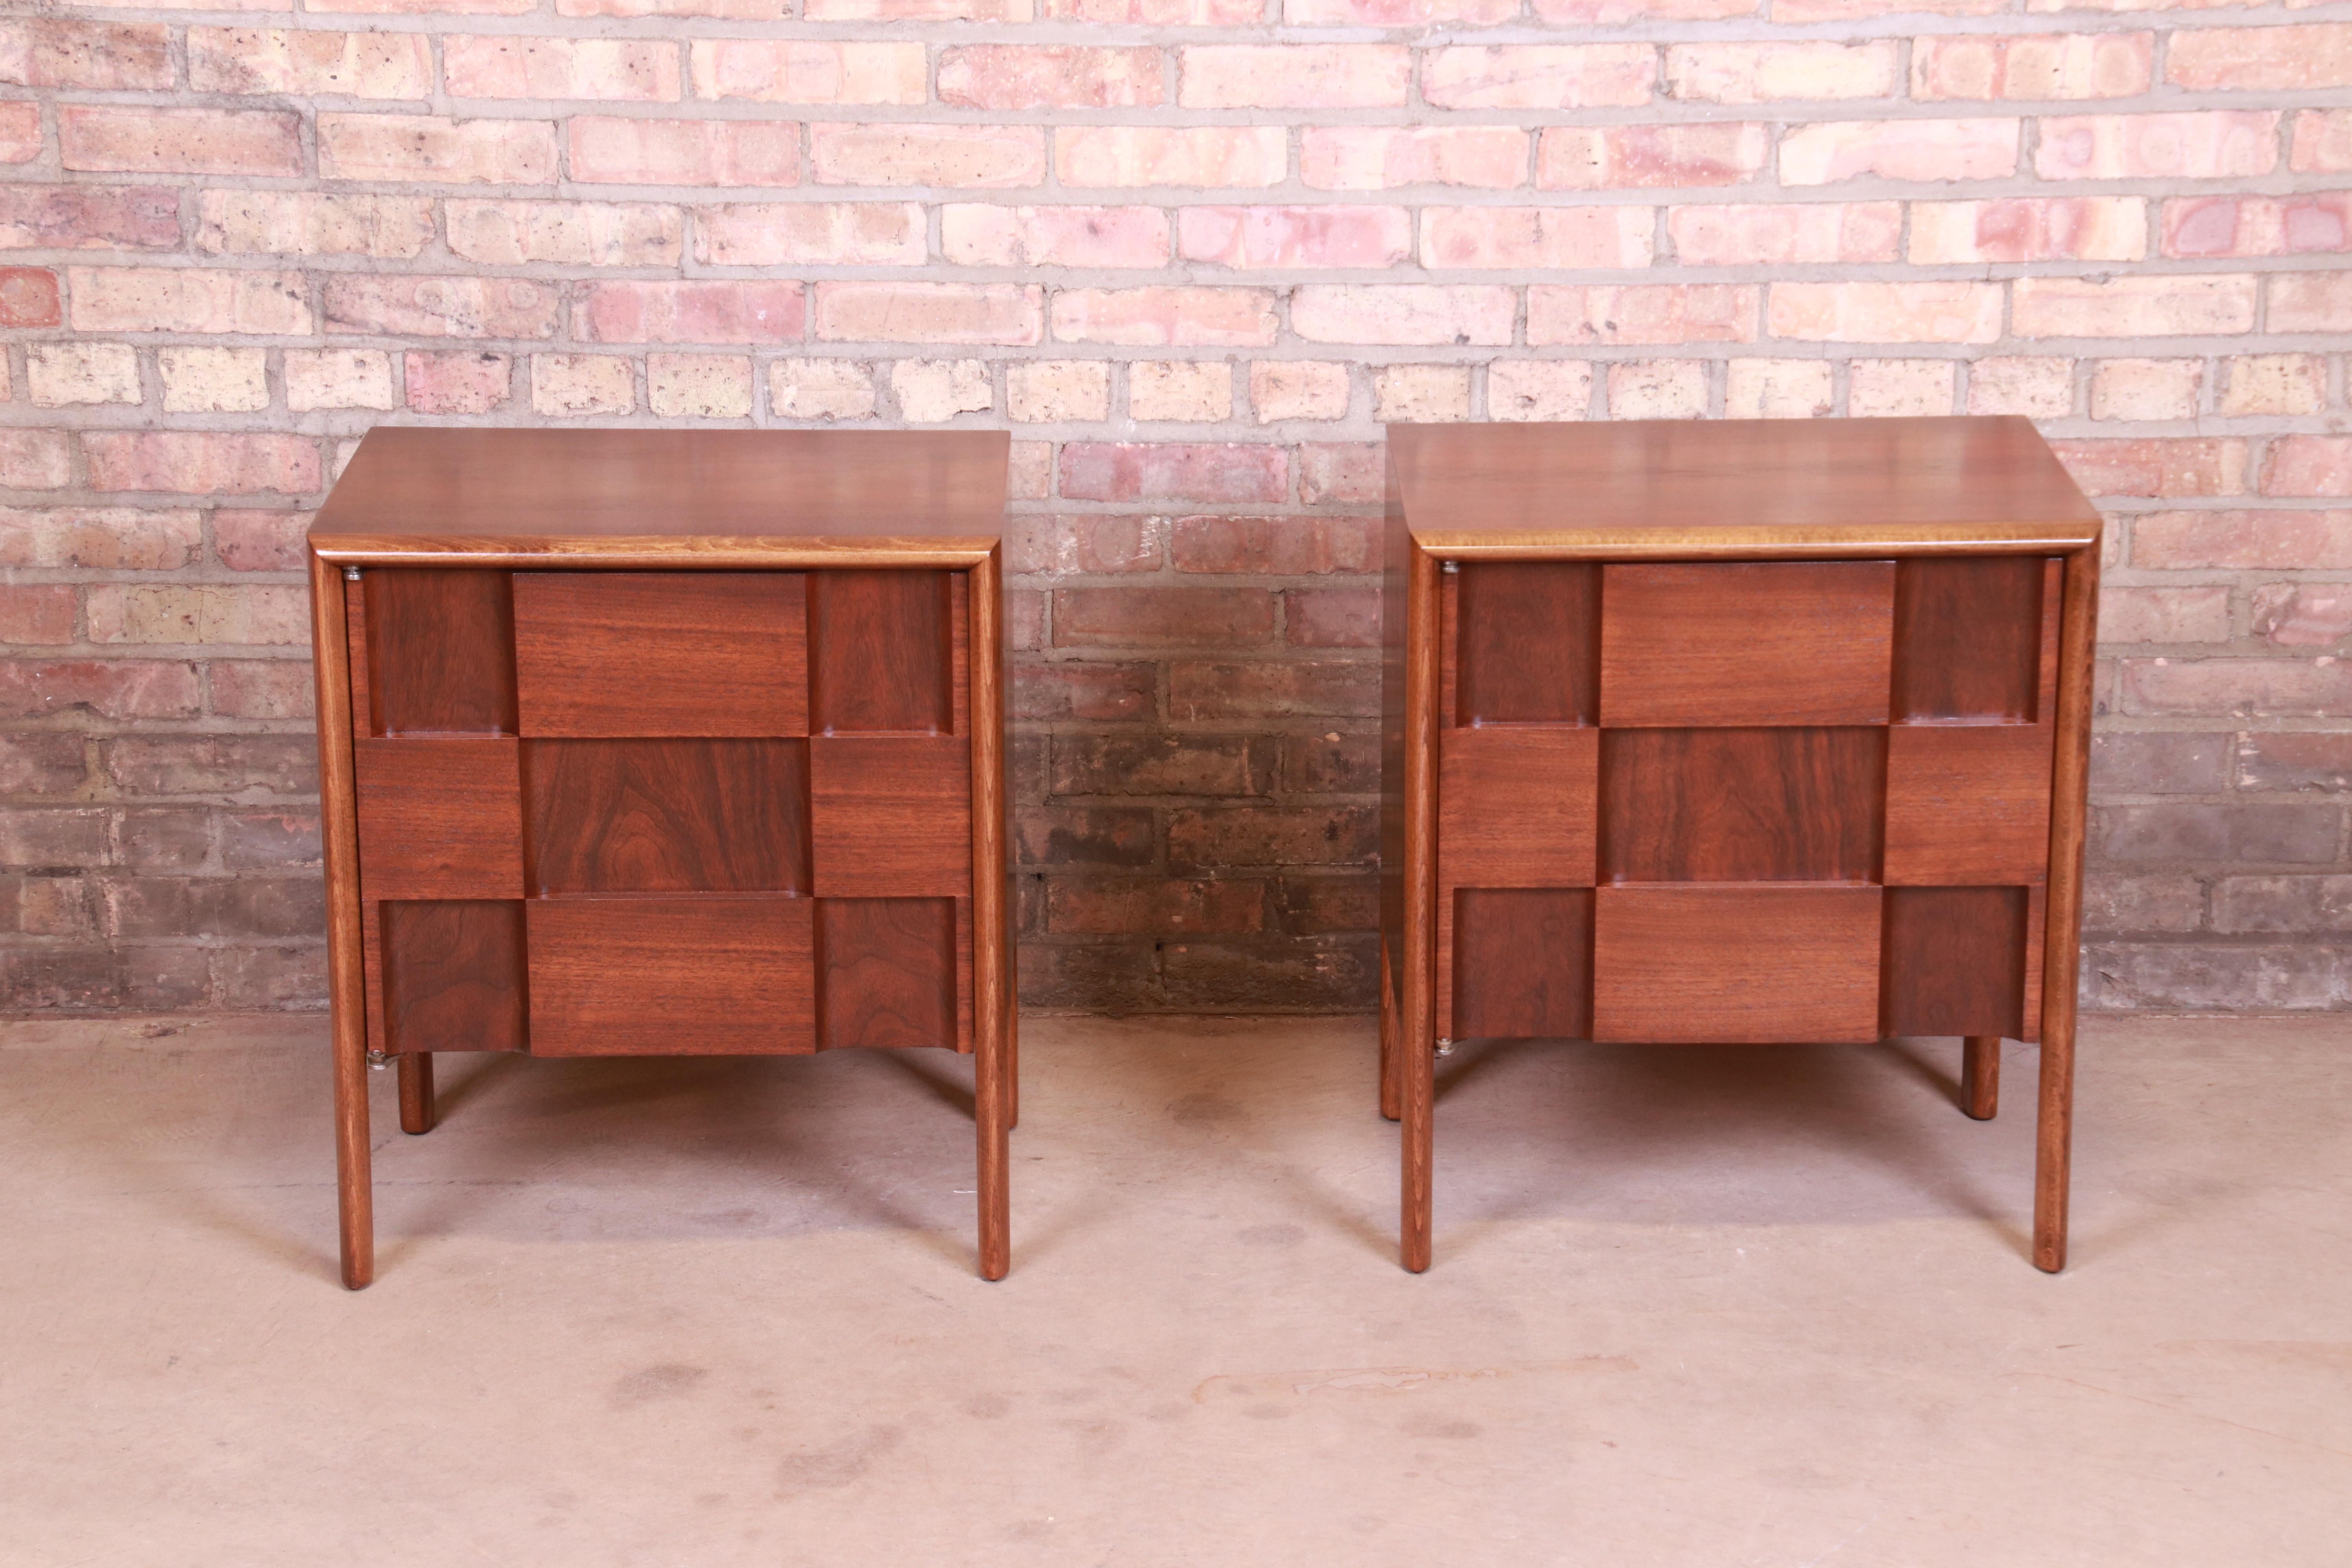 An exceptional pair of midcentury Swedish modern sculpted walnut 